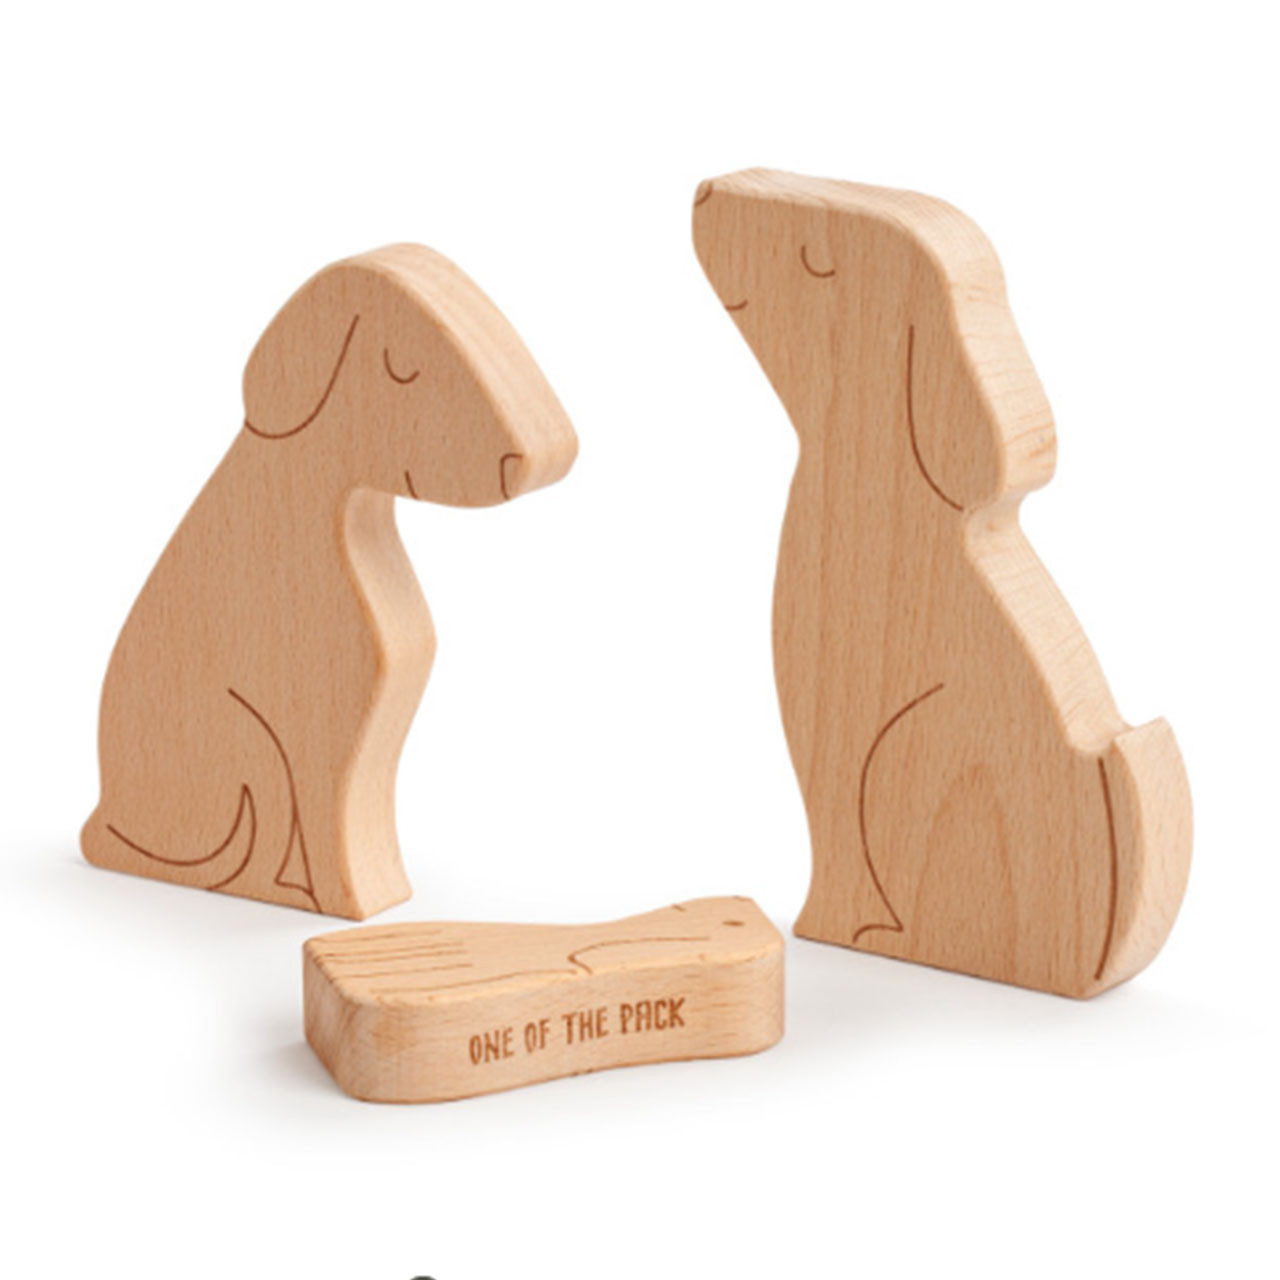 Individual pieces of the Dog Family Wood Puzzle